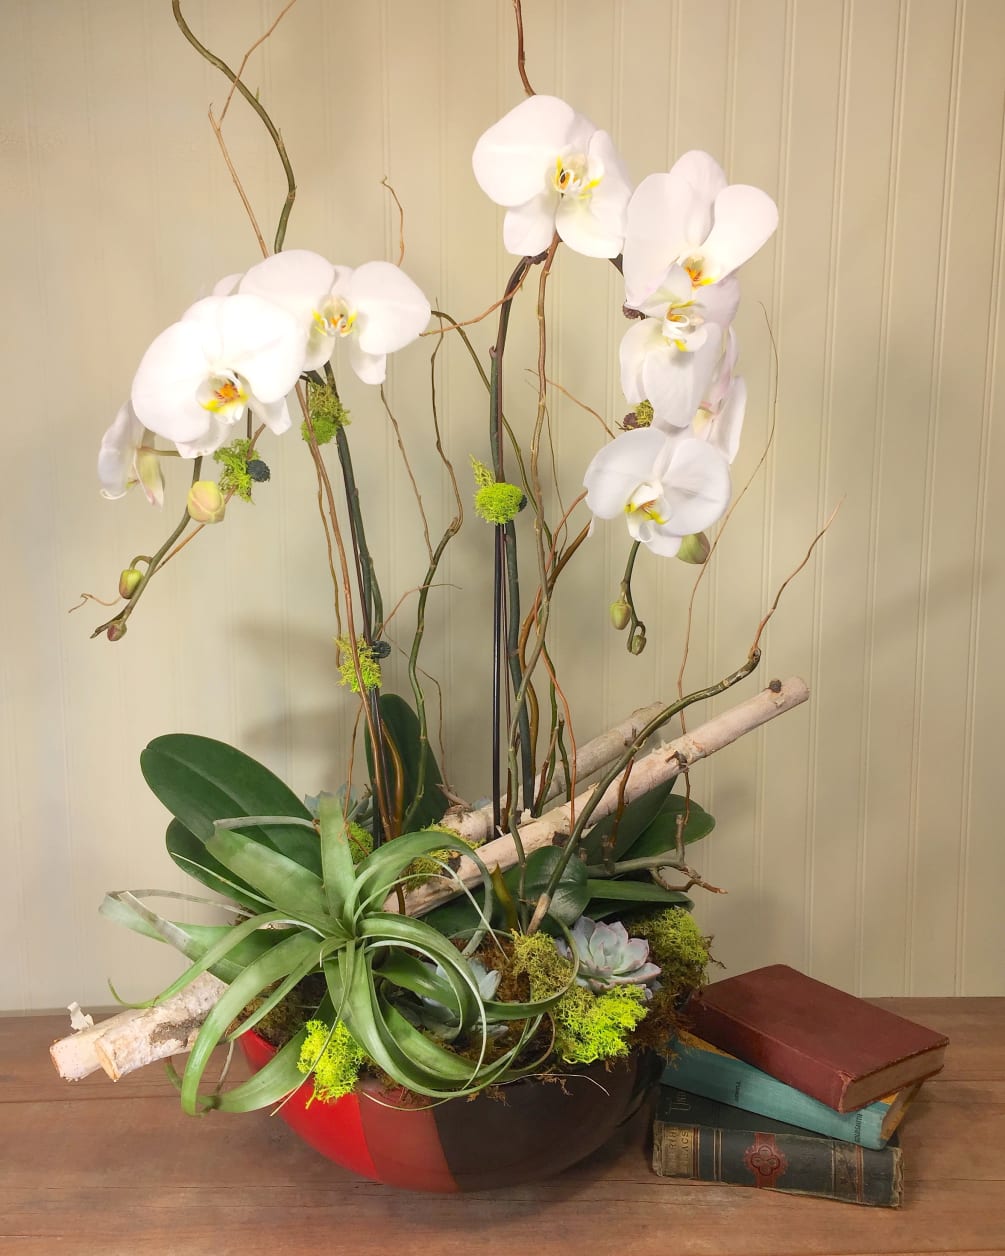 This amazing piece is simply one of a kind. No two phalenopsis